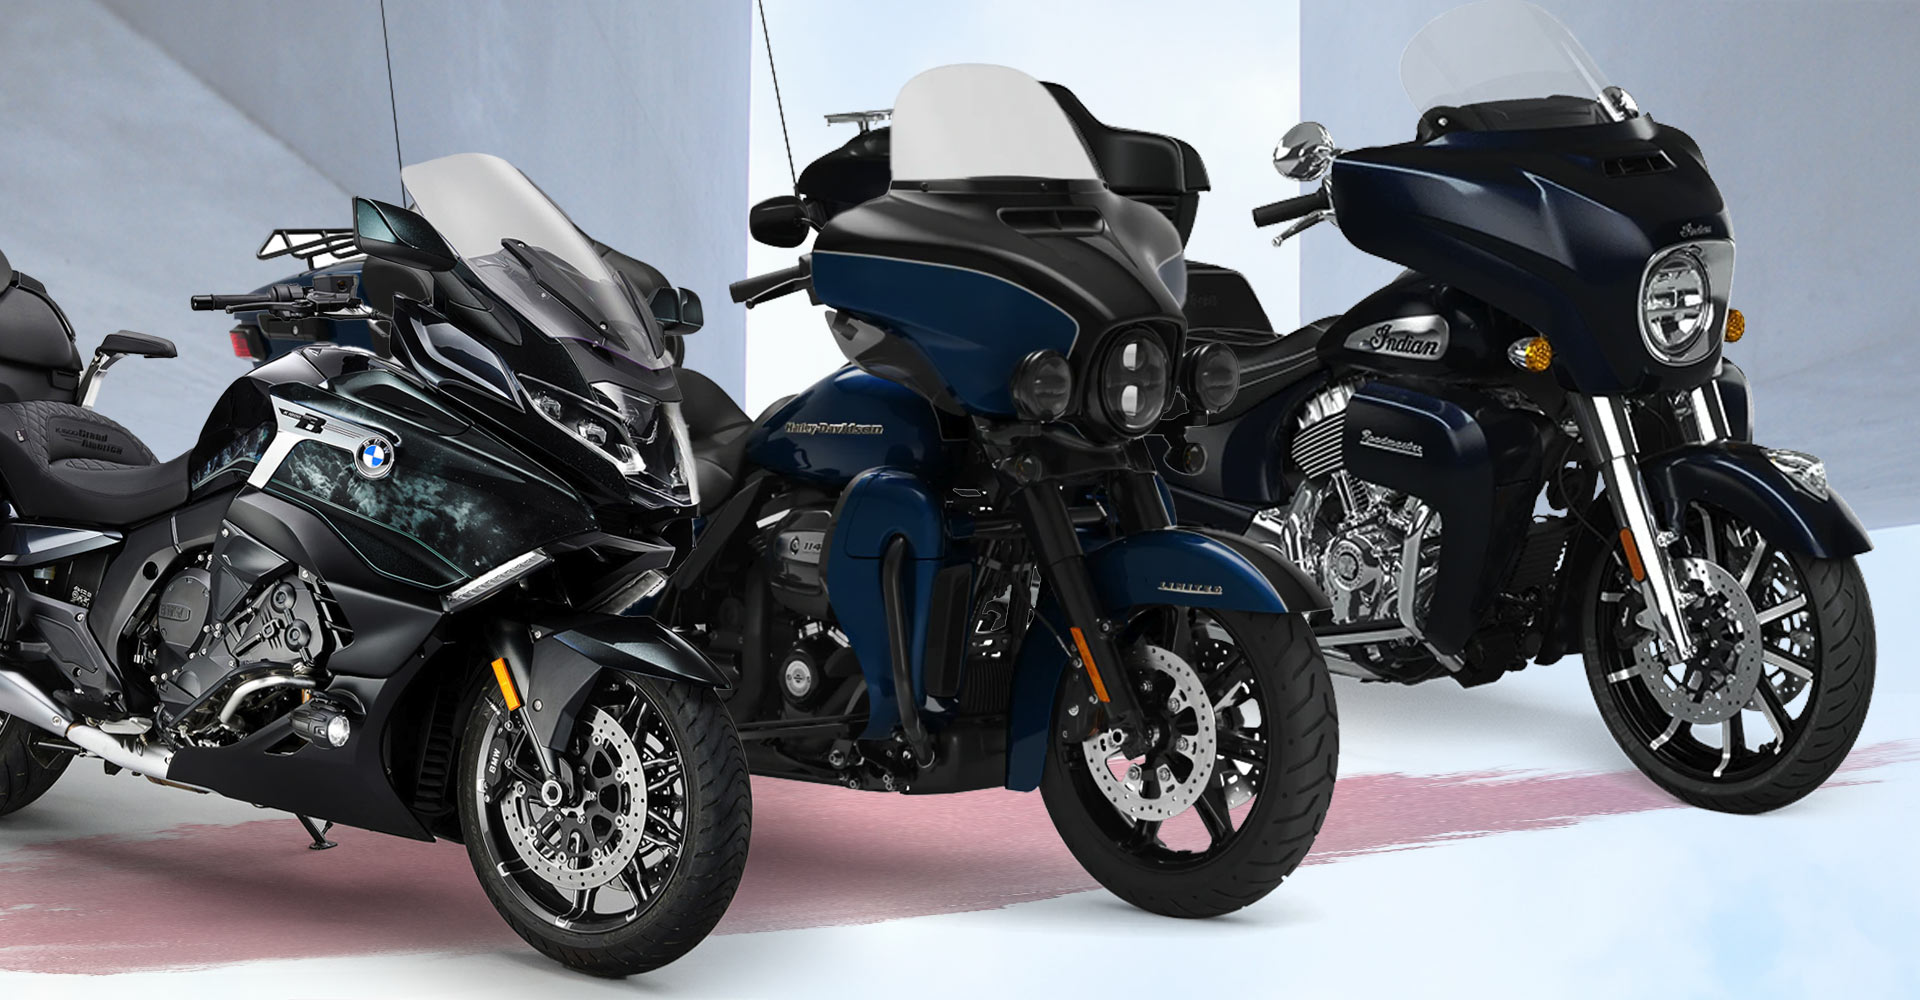 The 10 Best Touring Motorcycles for 2022